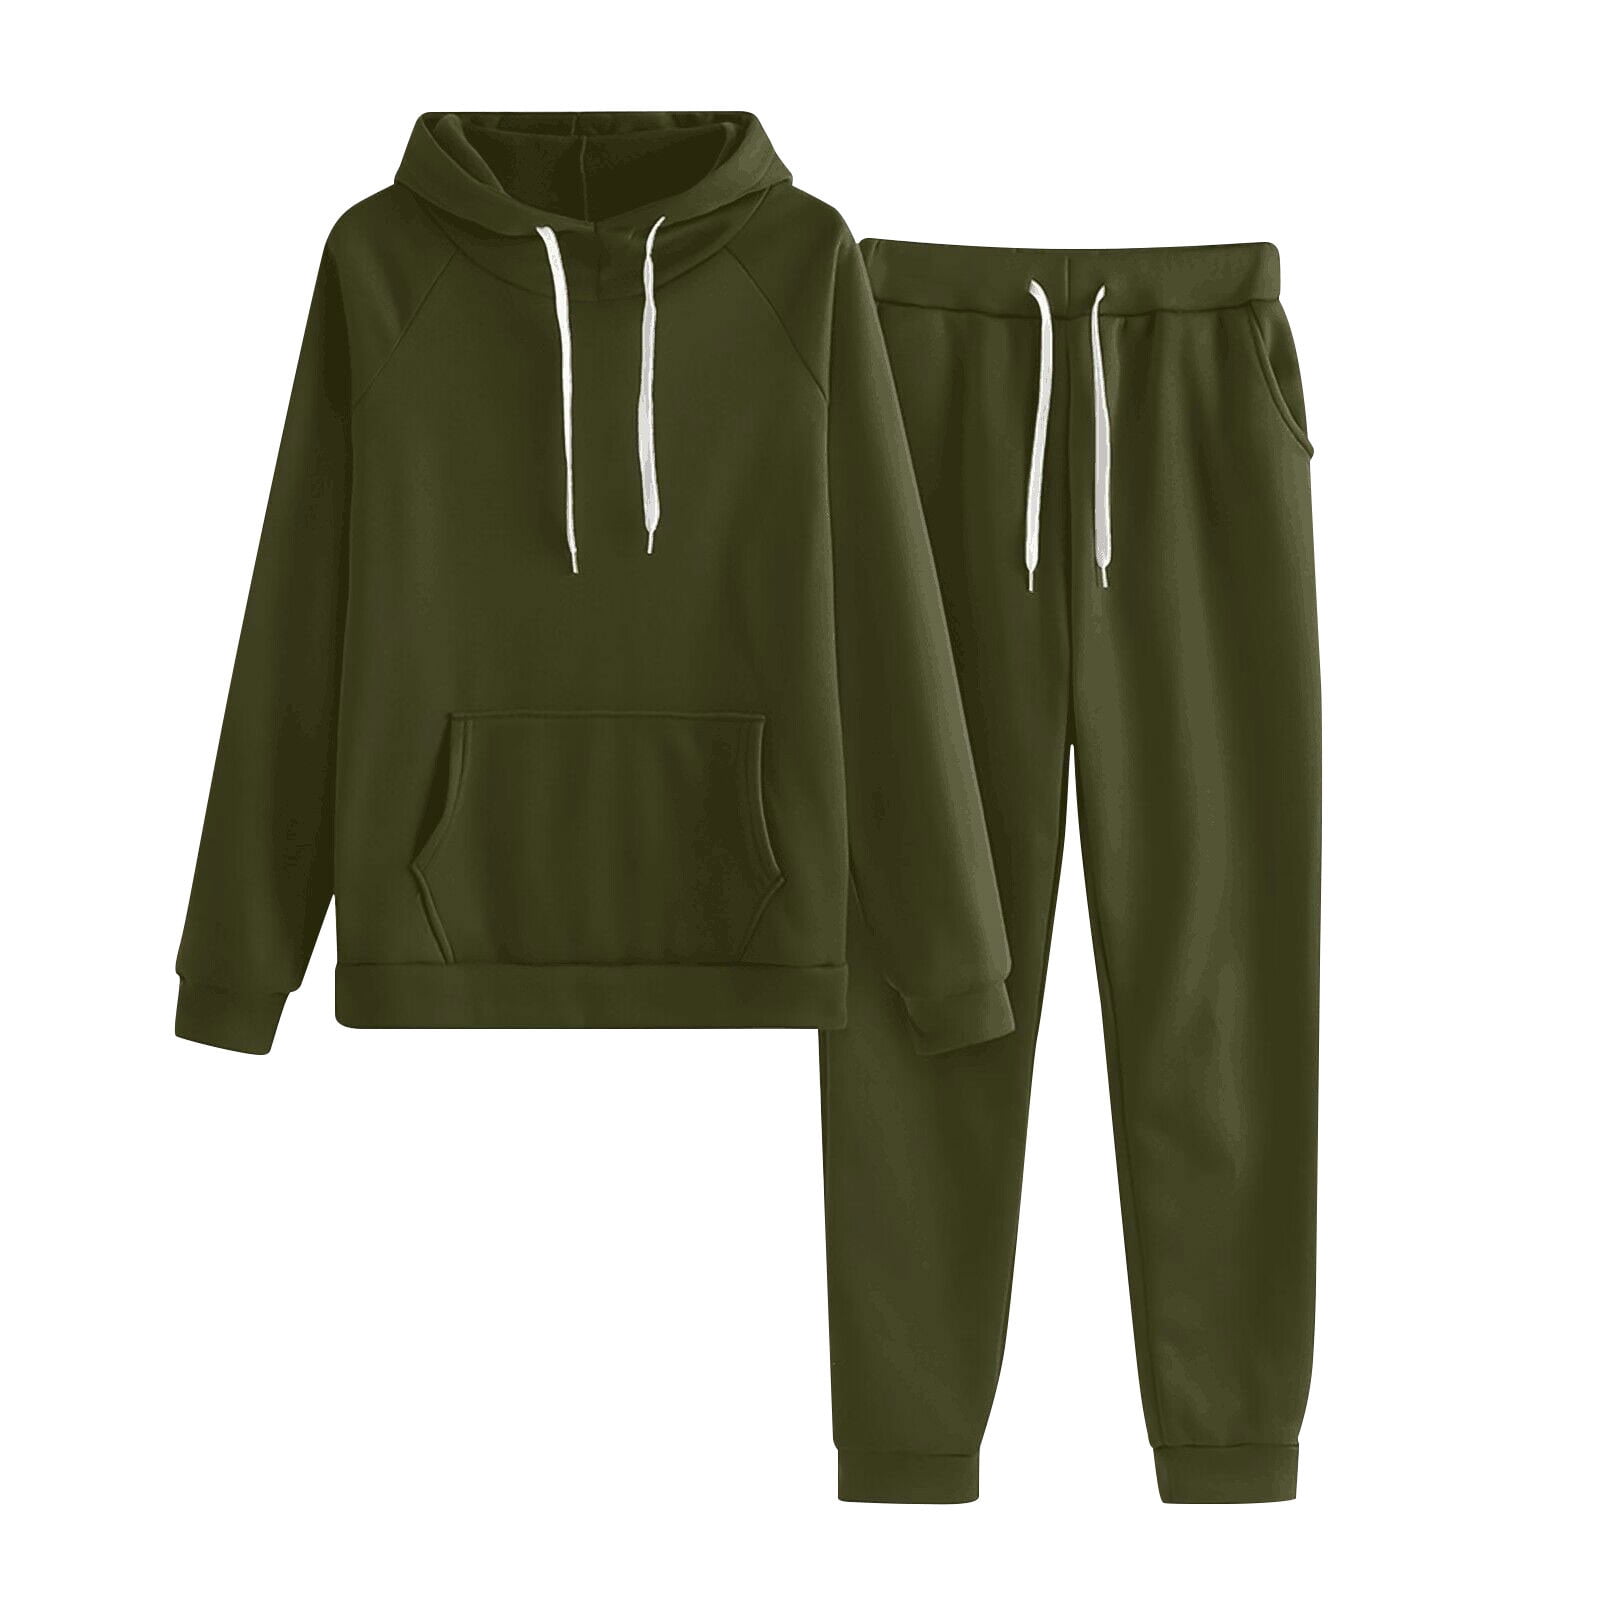 Edvintorg Women's Solid Tracksuits Set Hooded Pullover Sweatshirt And ...